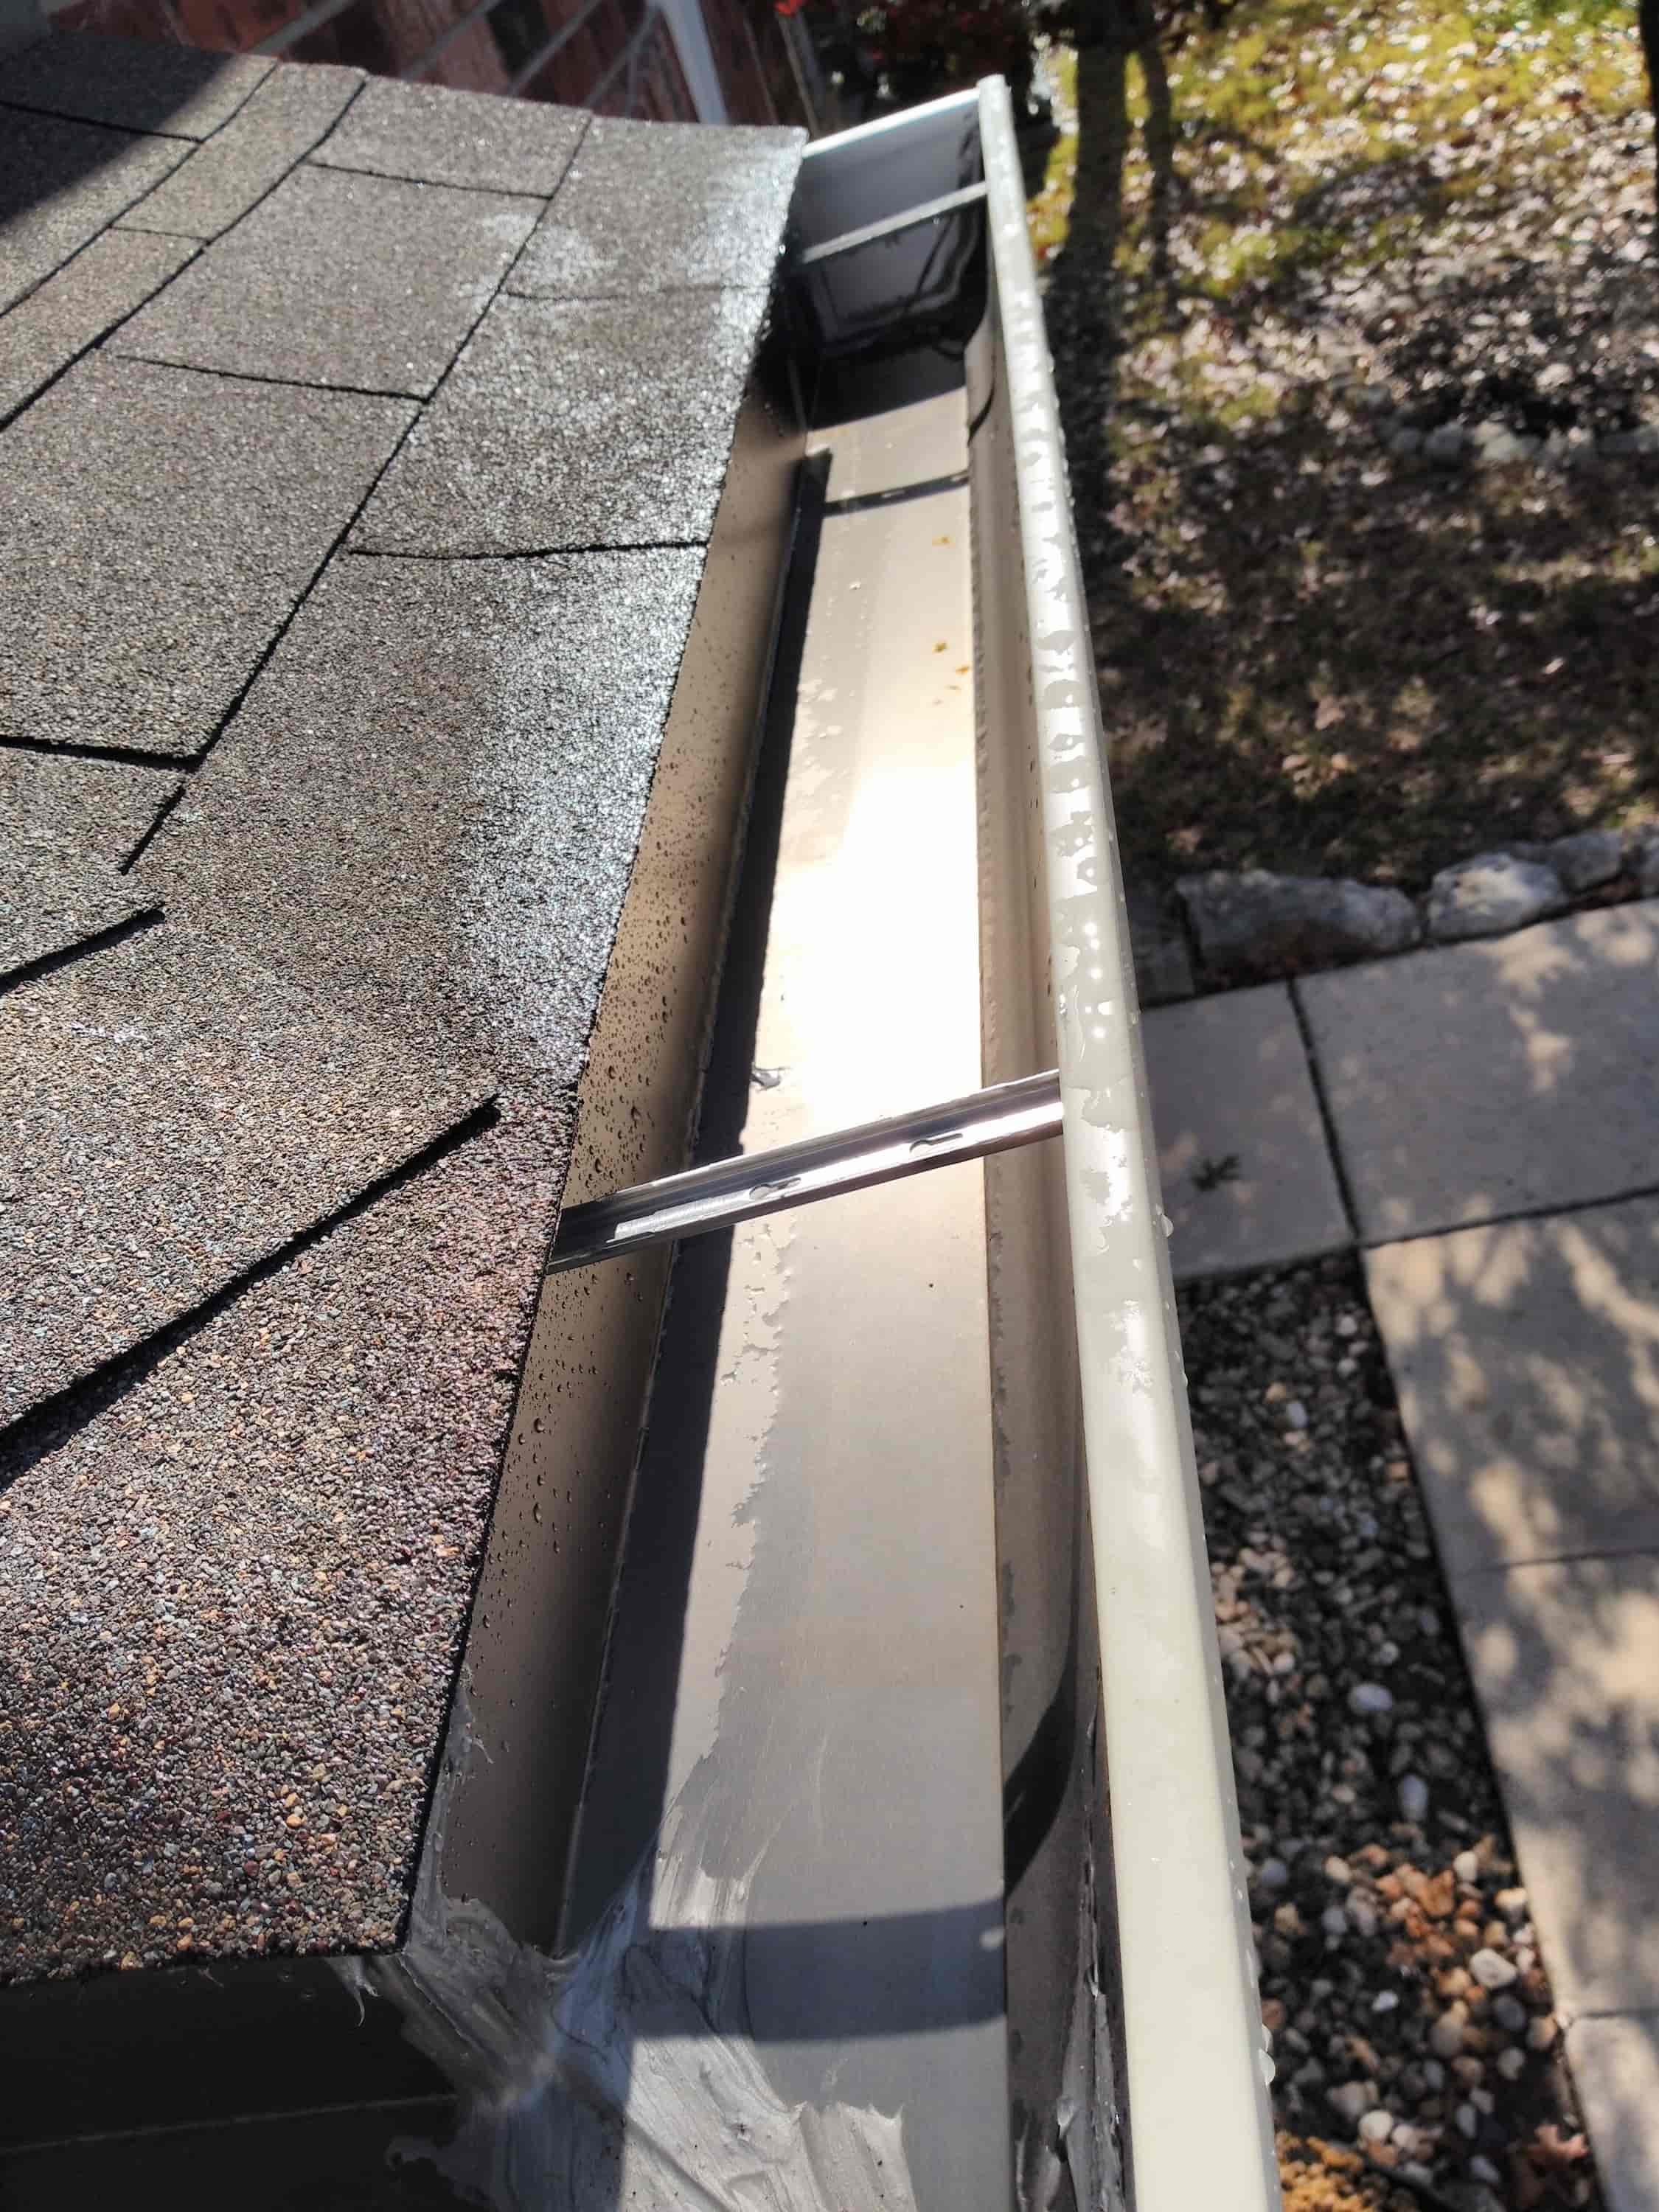 gutter cleaning machine hire